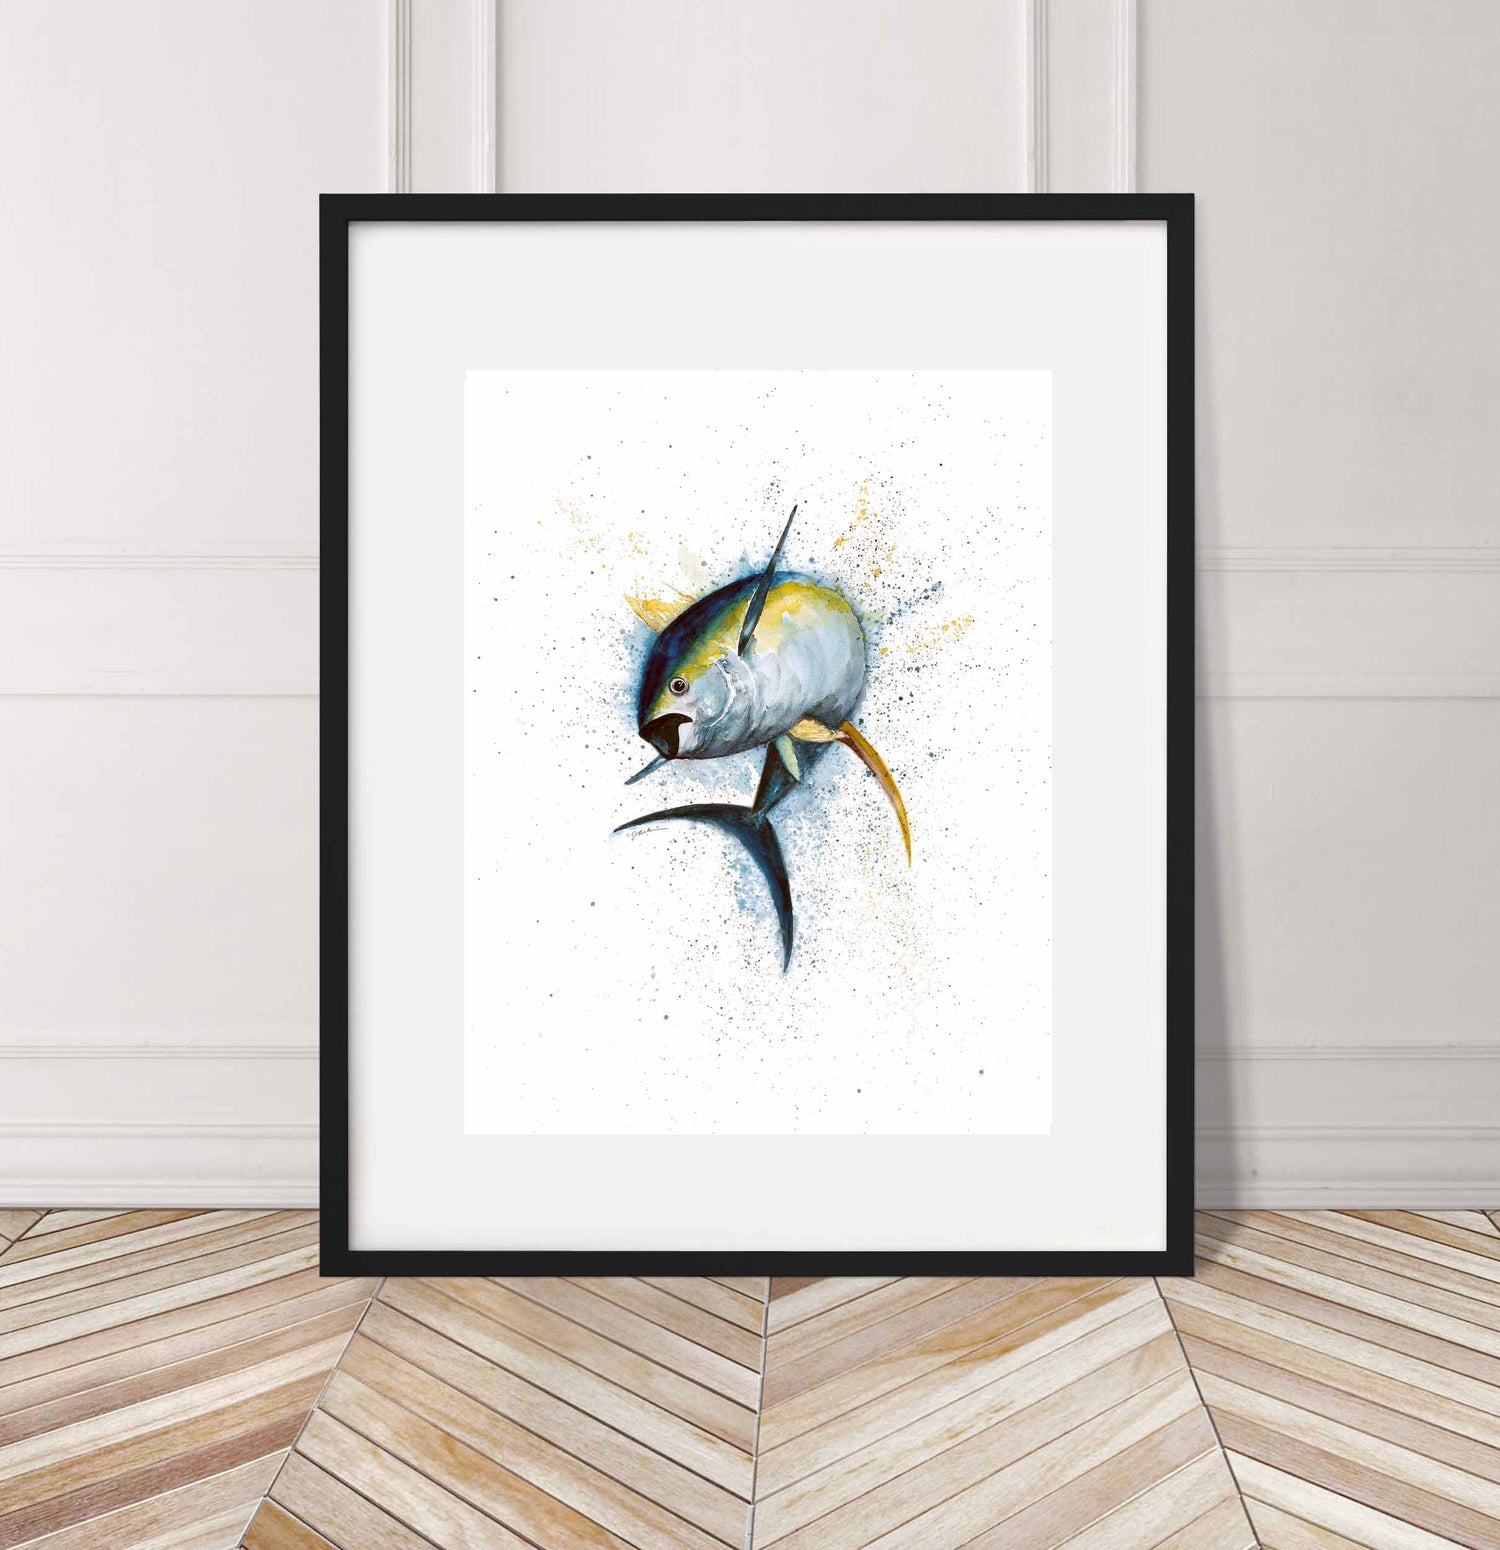 Yellow Fin Tuna, jumping out of water, Watercolor Painting Giclée Fine Art Print